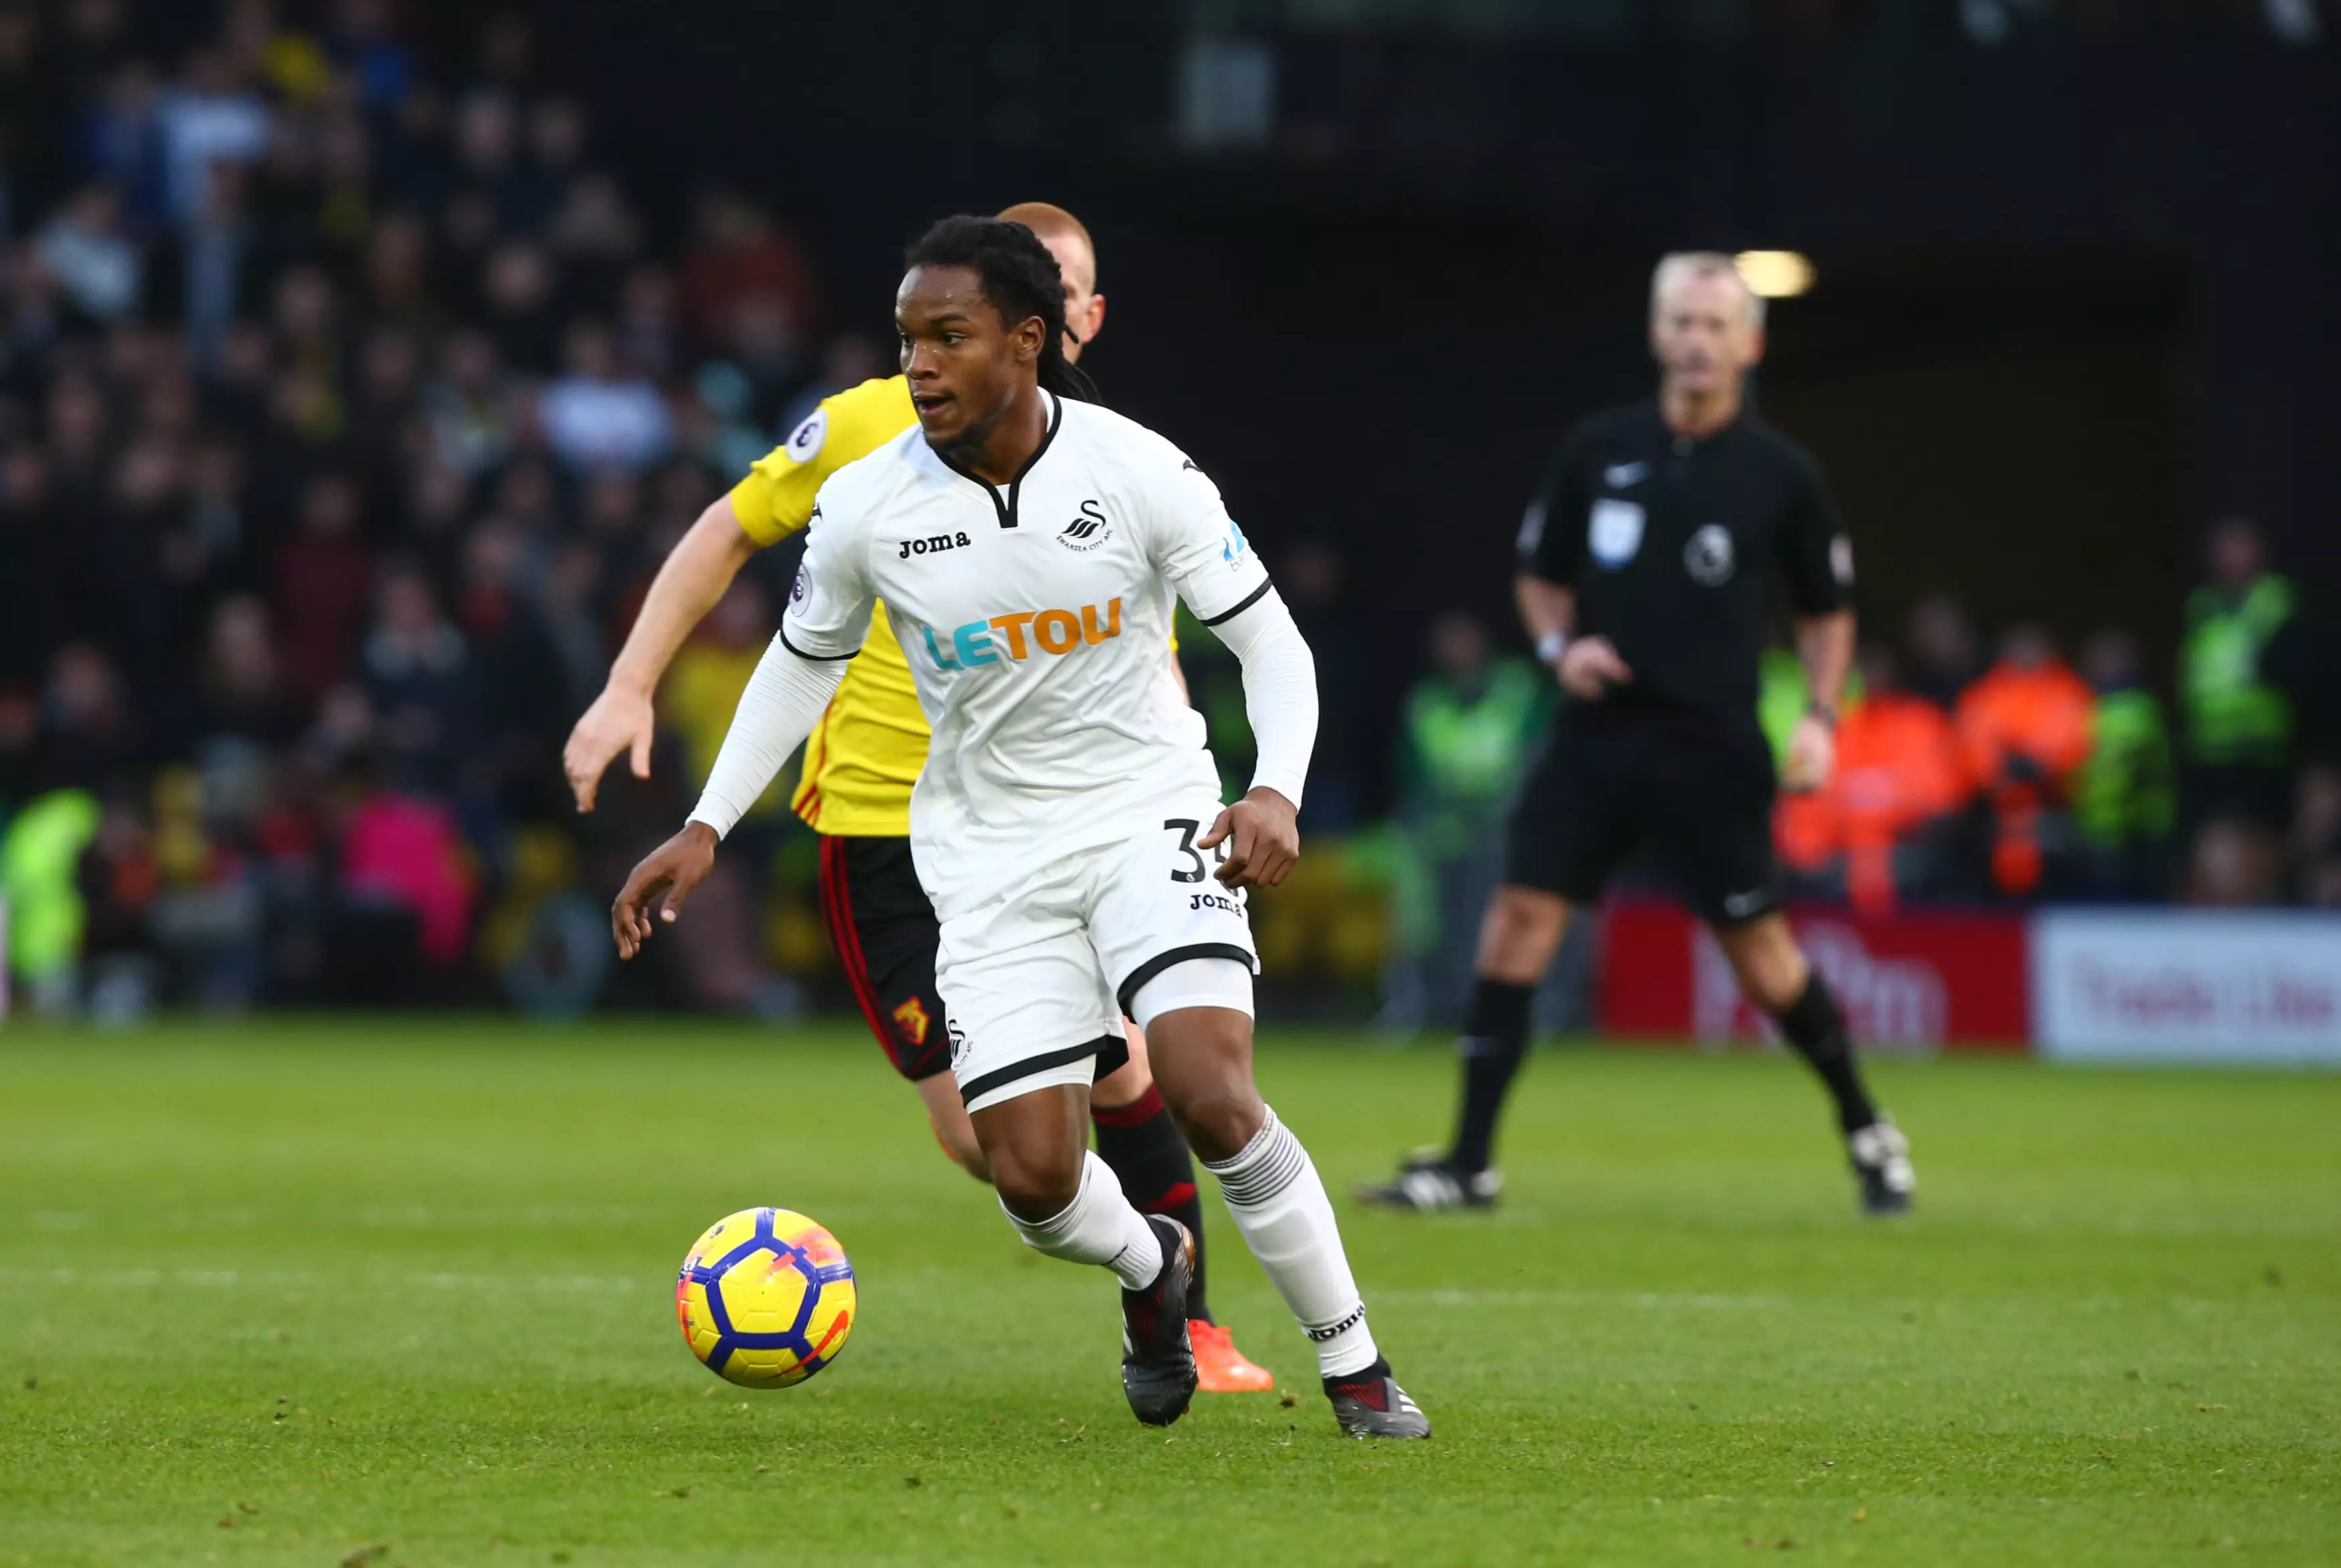 Sanches in action for Swansea. Image: PA